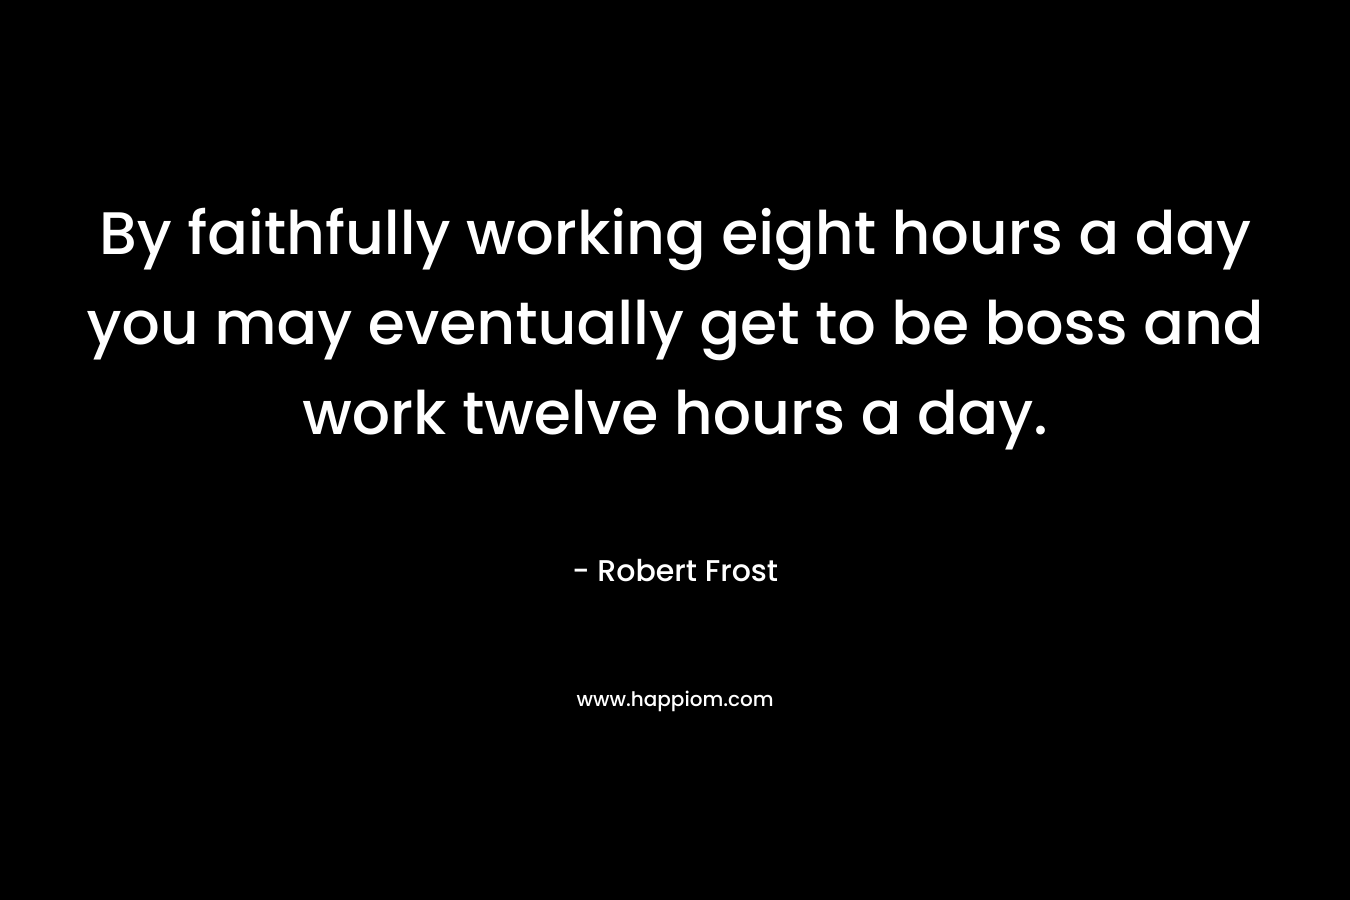 By faithfully working eight hours a day you may eventually get to be boss and work twelve hours a day. – Robert Frost